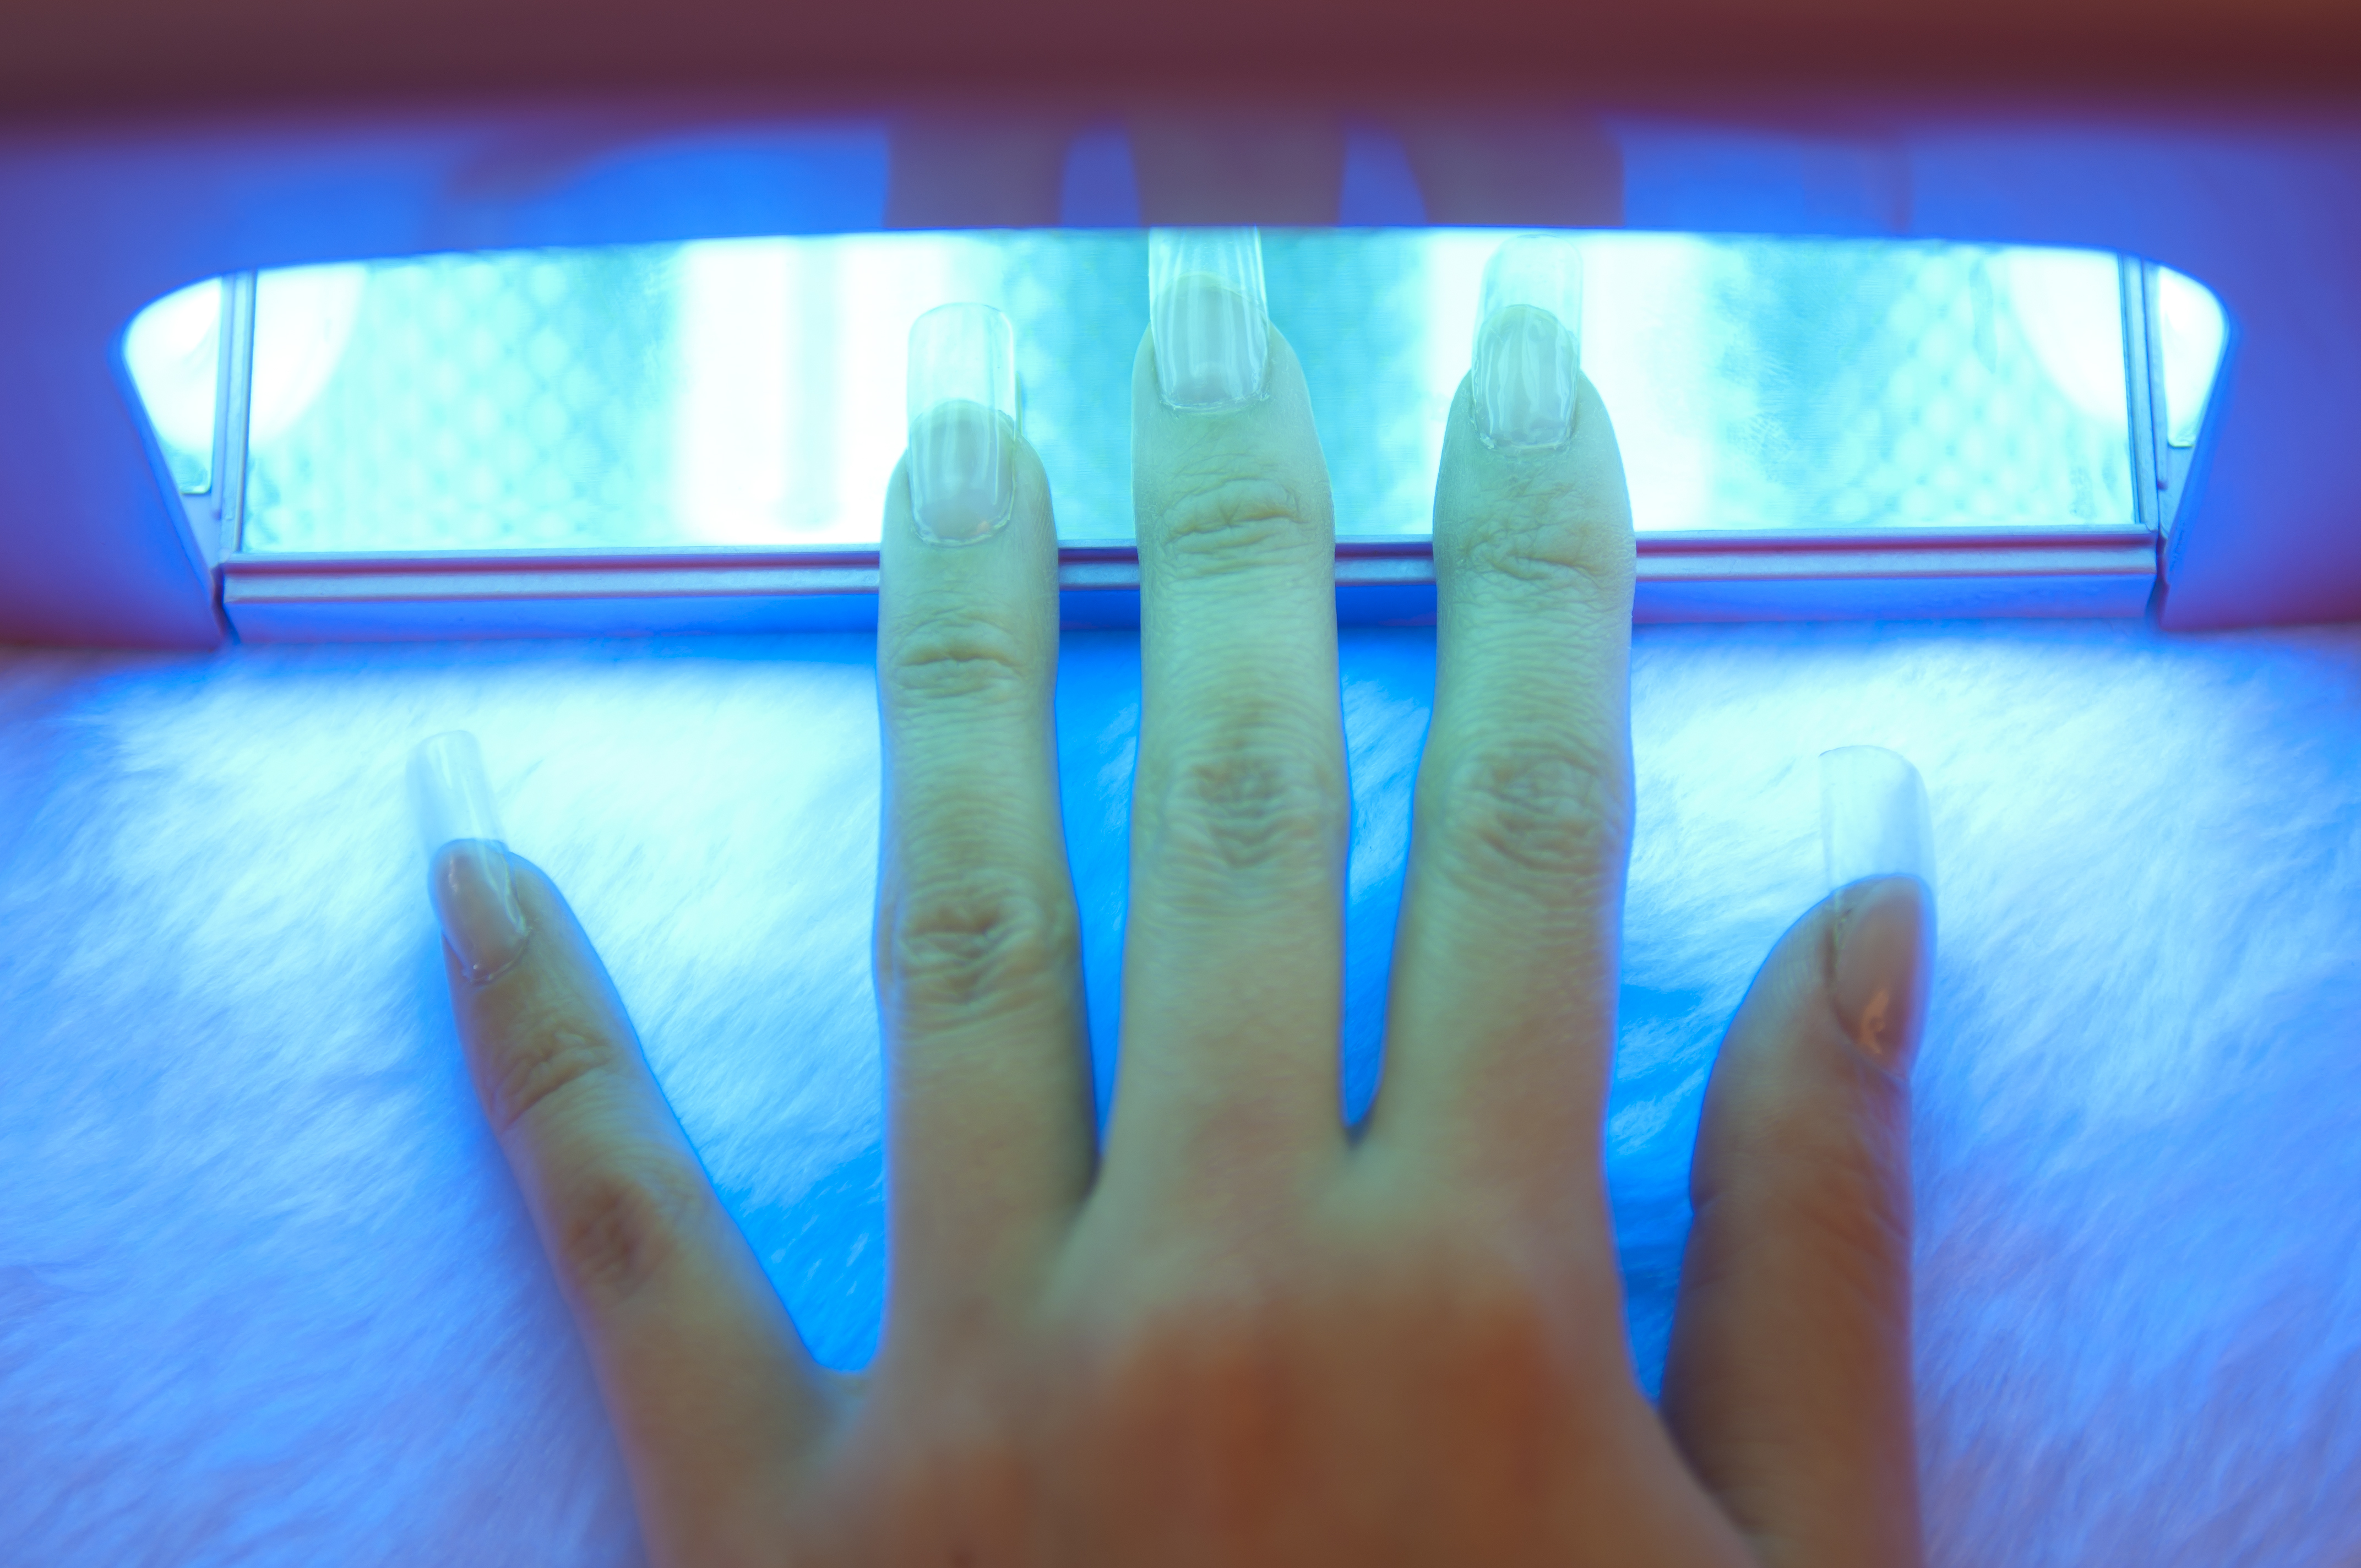 DIY UV Lamp Is The Cure For Nails And More